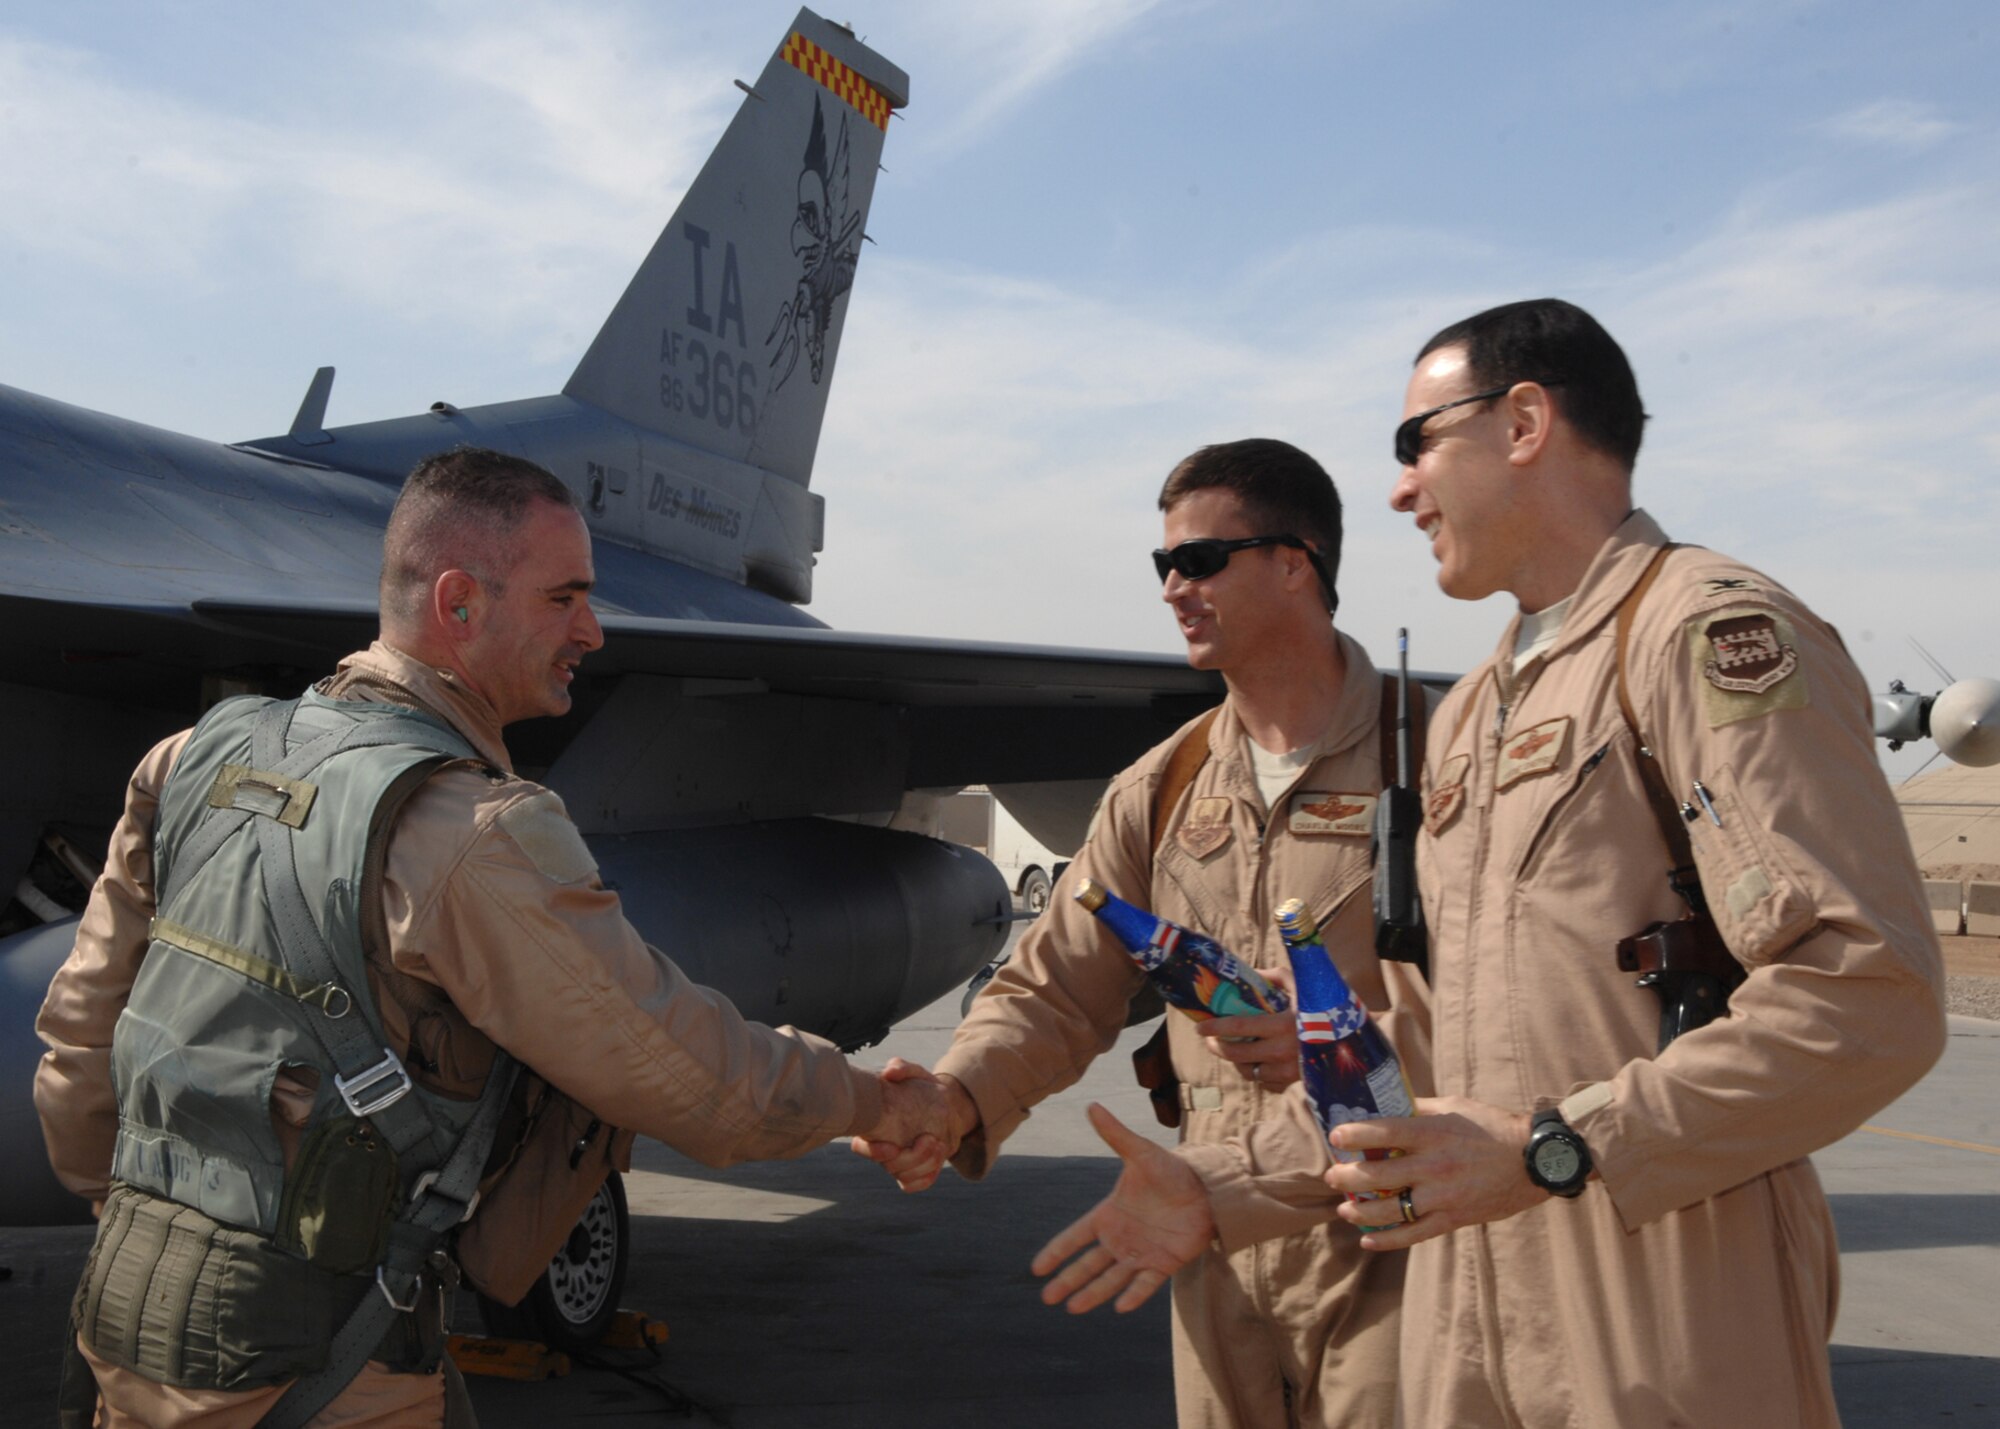 BALAD AIR BASE, Iraq -- Lt. Col. George Uribe, 332nd Expeditionary Operations Group fighter pilot, is greeted and congratulated by Col. Steven Shepro, 332nd Air Expeditionary Wing vice commander, and Col. Charles Moore, 332nd Expeditionary Operations Group commander, after completing 1,000 combat flying hours as an F-16 Fighting Falcon pilot here, Feb. 17. Colonel Uribe is deployed from Tyndall Air Force Base, Fla. (U.S. Air Force photo/ Senior Airman Julianne Showalter)